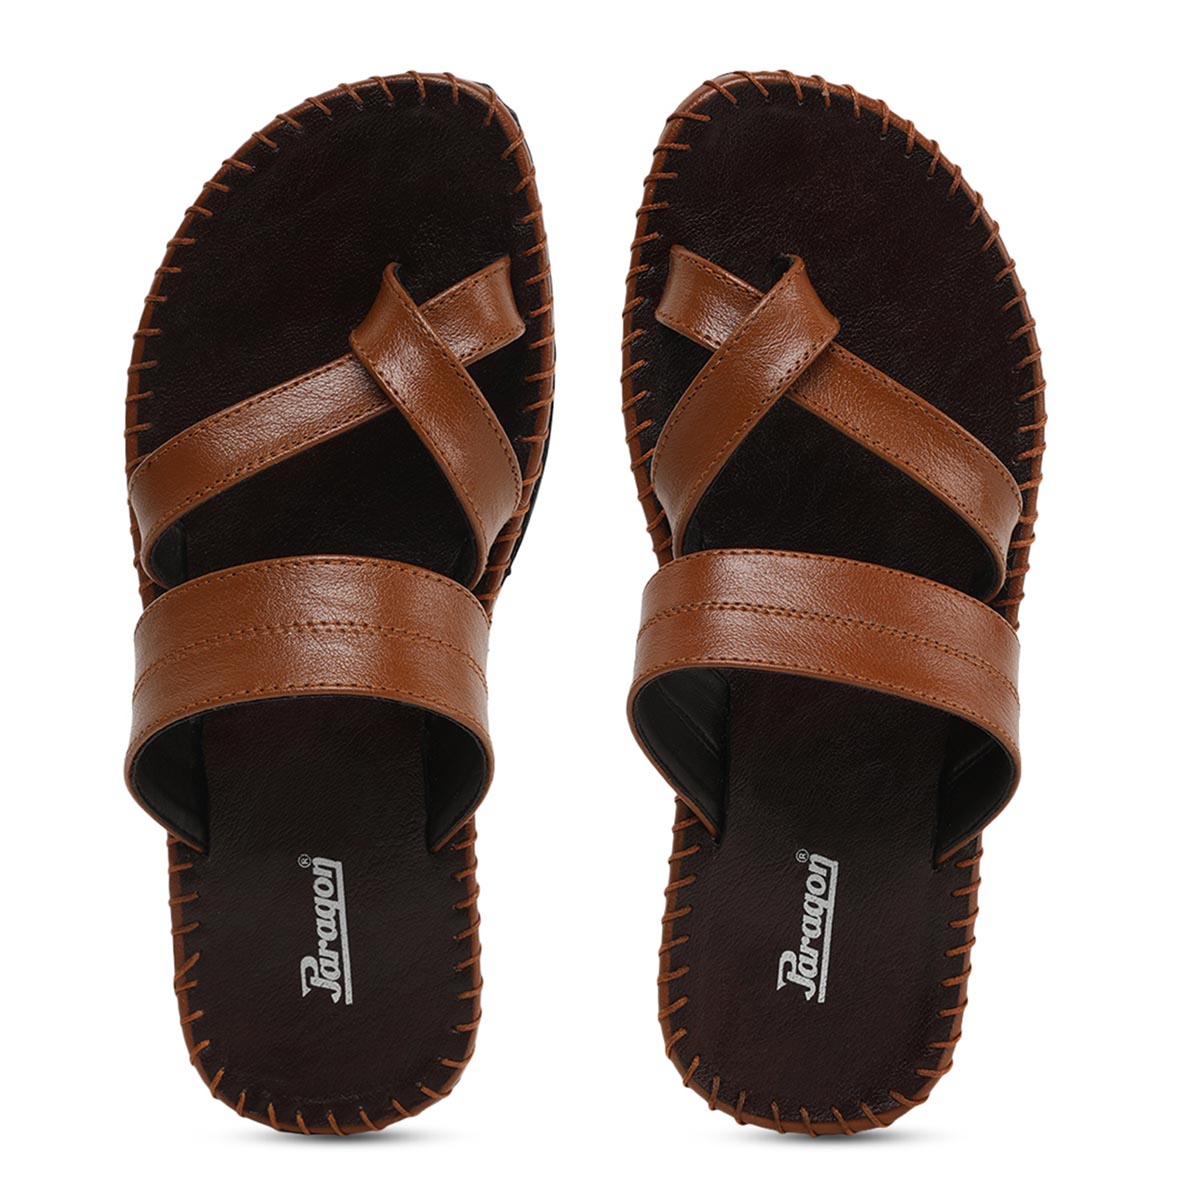 Paragon K2002G Men Stylish Sandals | Comfortable Sandals for Daily Outdoor Use | Casual Formal Sandals with Cushioned Soles